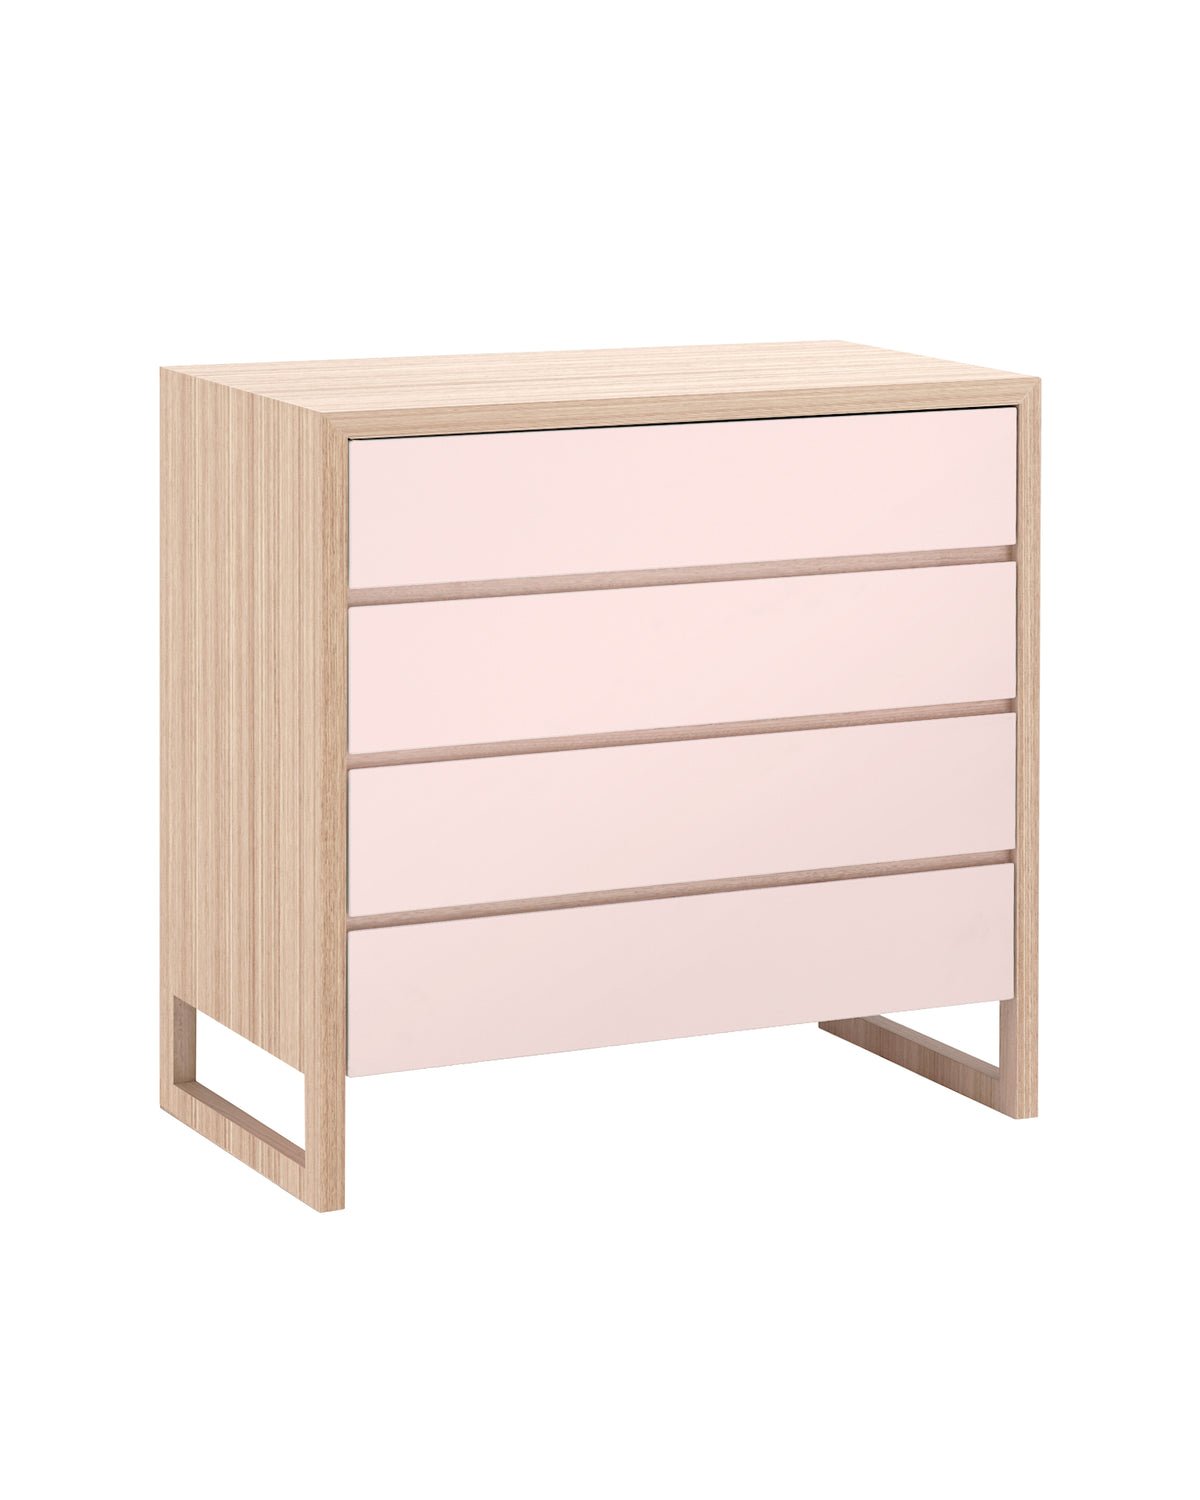 COLOUR BOX CHEST OF DRAWERS